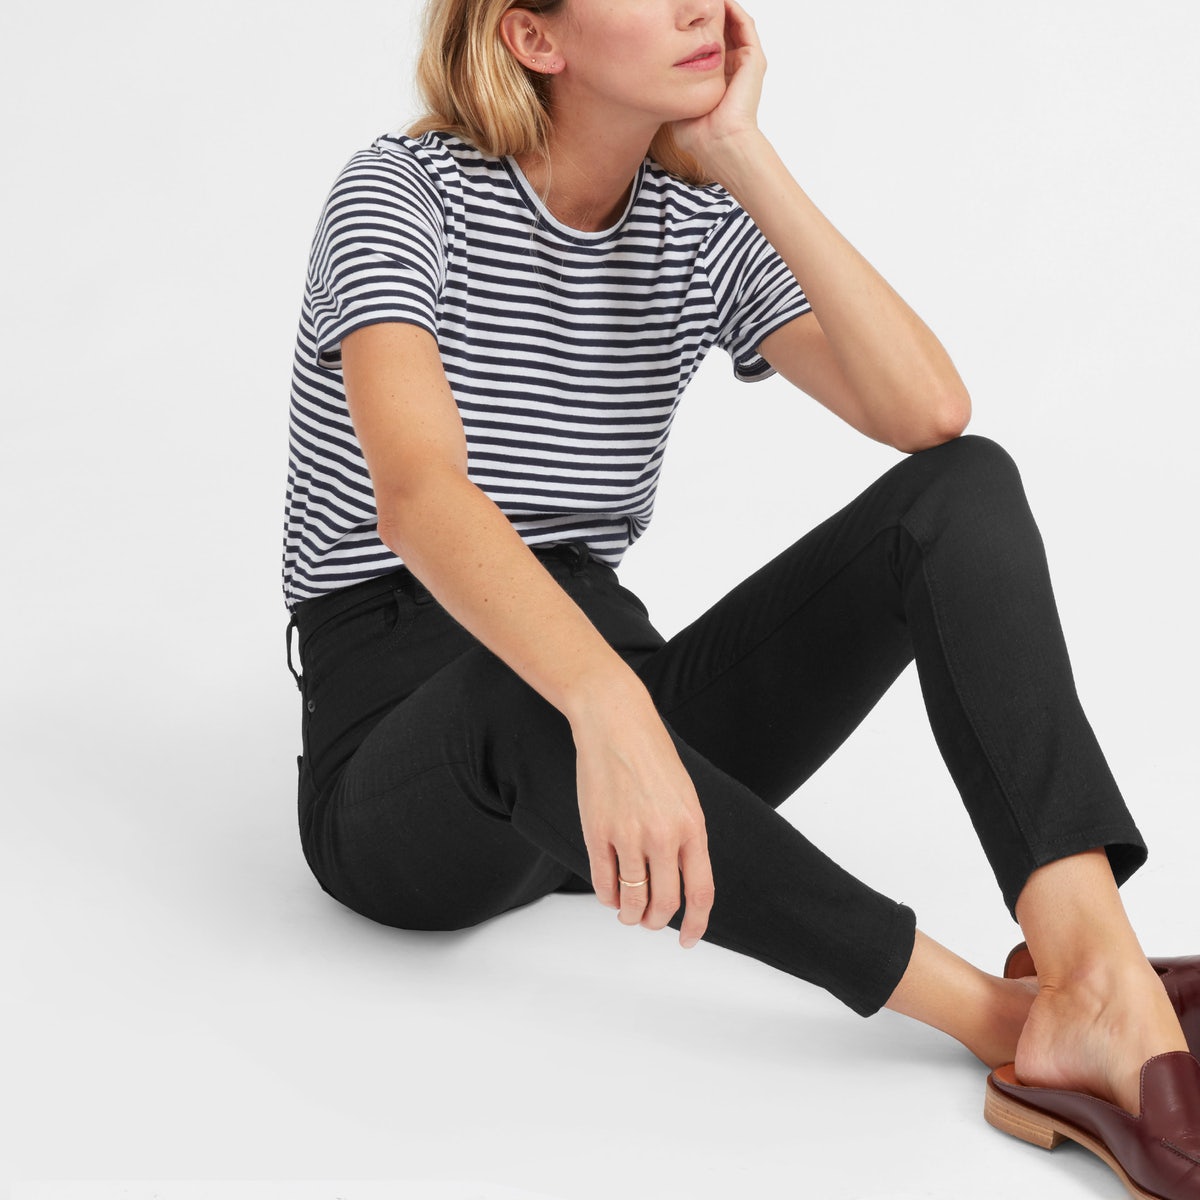 Everlane's leggings are finally here and you won't believe the